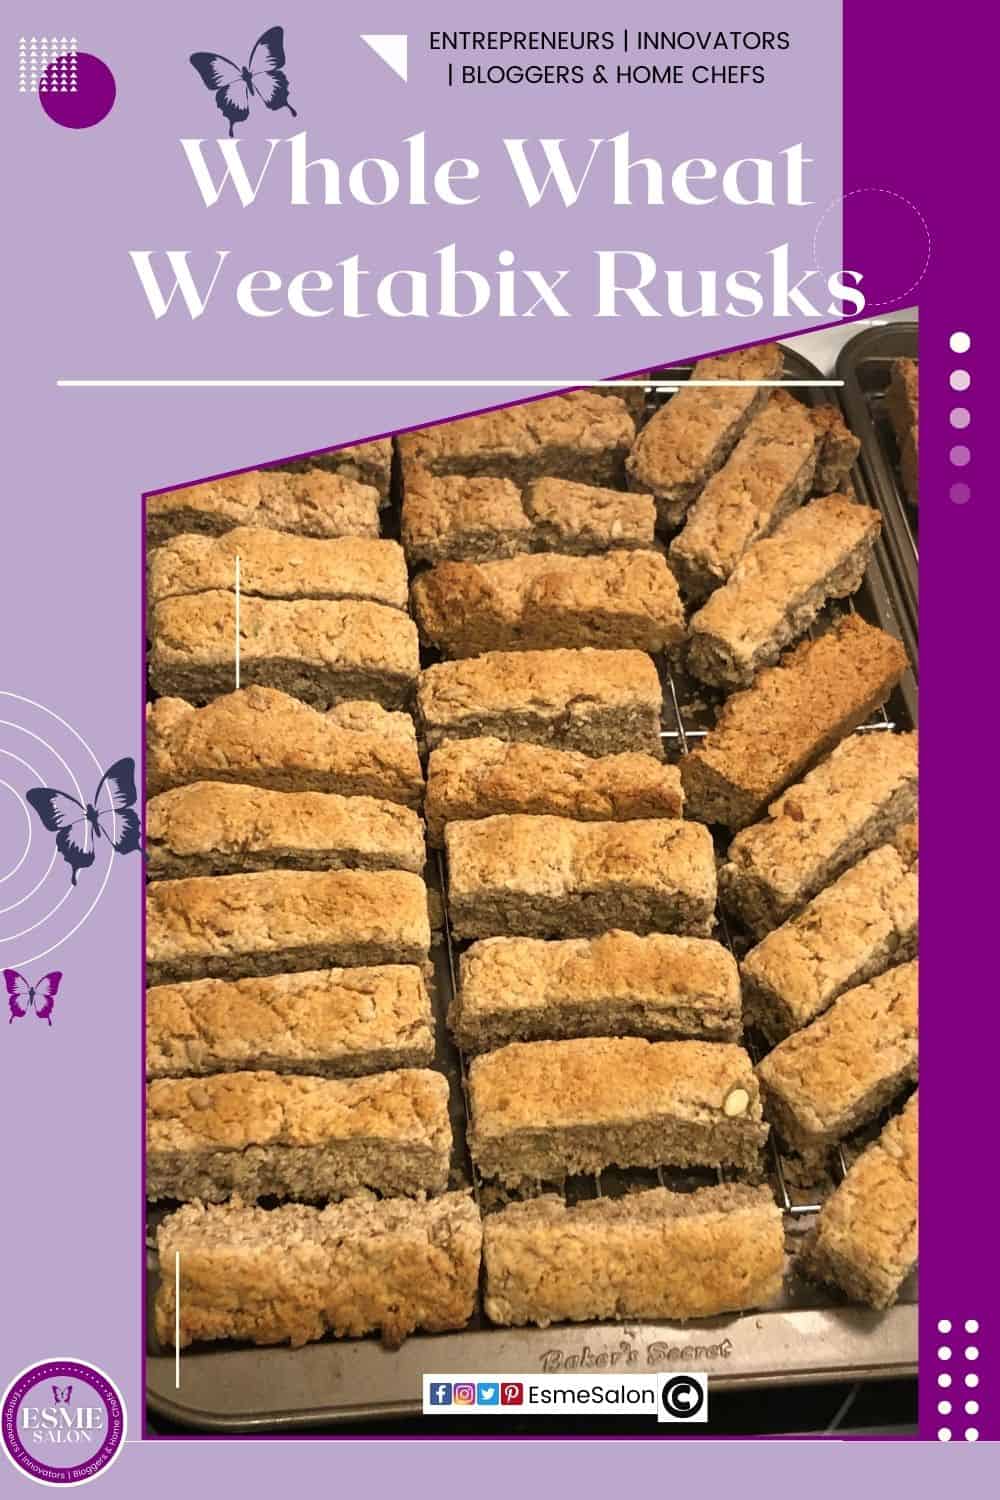 an image of a baking tray filled with Whole Wheat Weetabix Rusks ready to be dried out